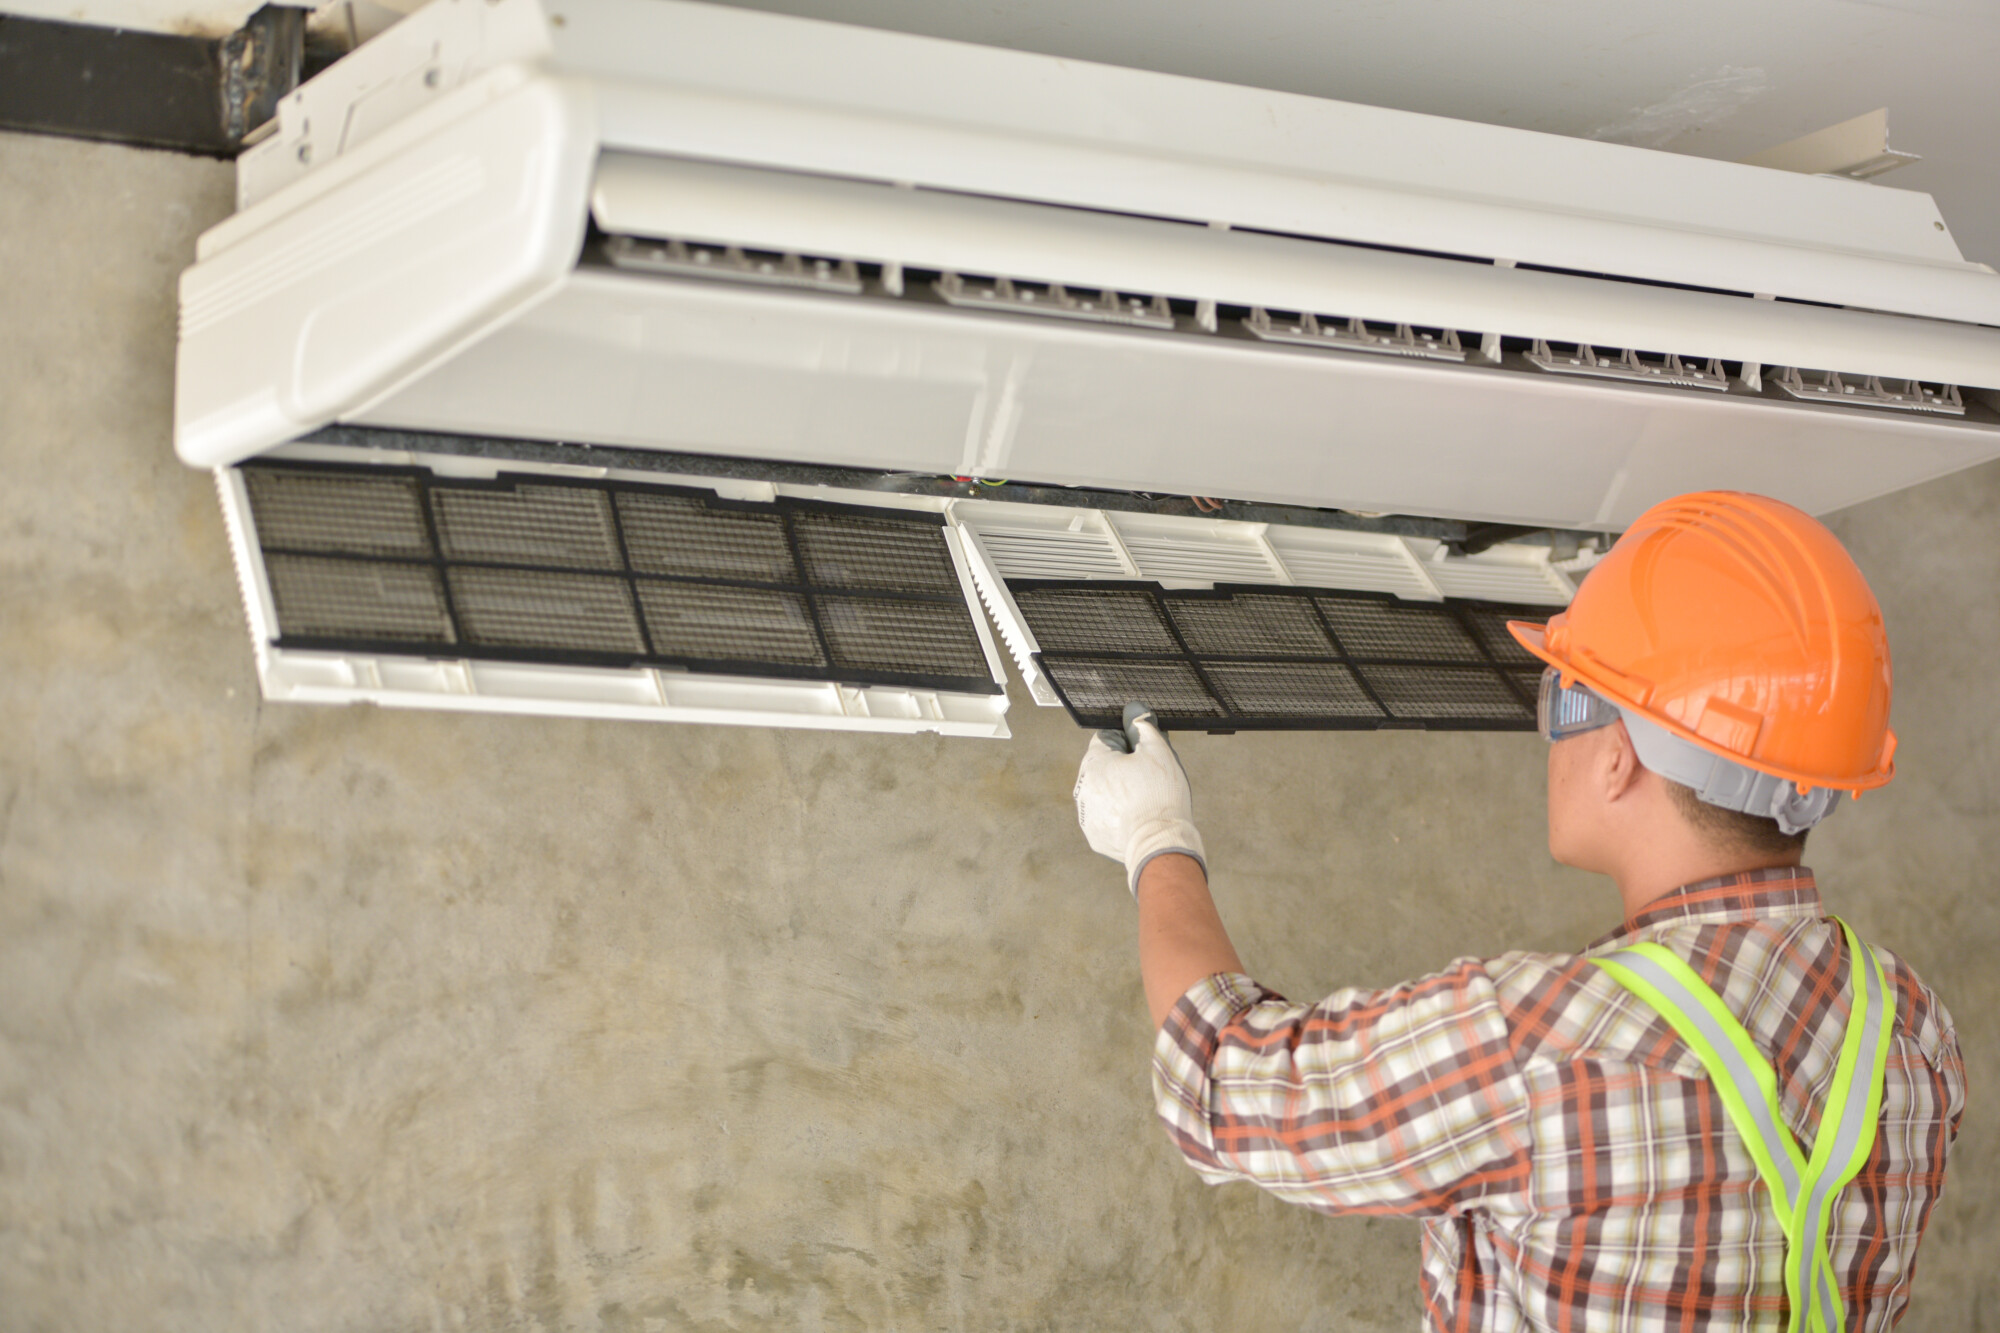 Regular HVAC maintenance can help to avoid costly repairs and keep your unit in top condition. See our guide to the HVAC maintenance tips you need to know.